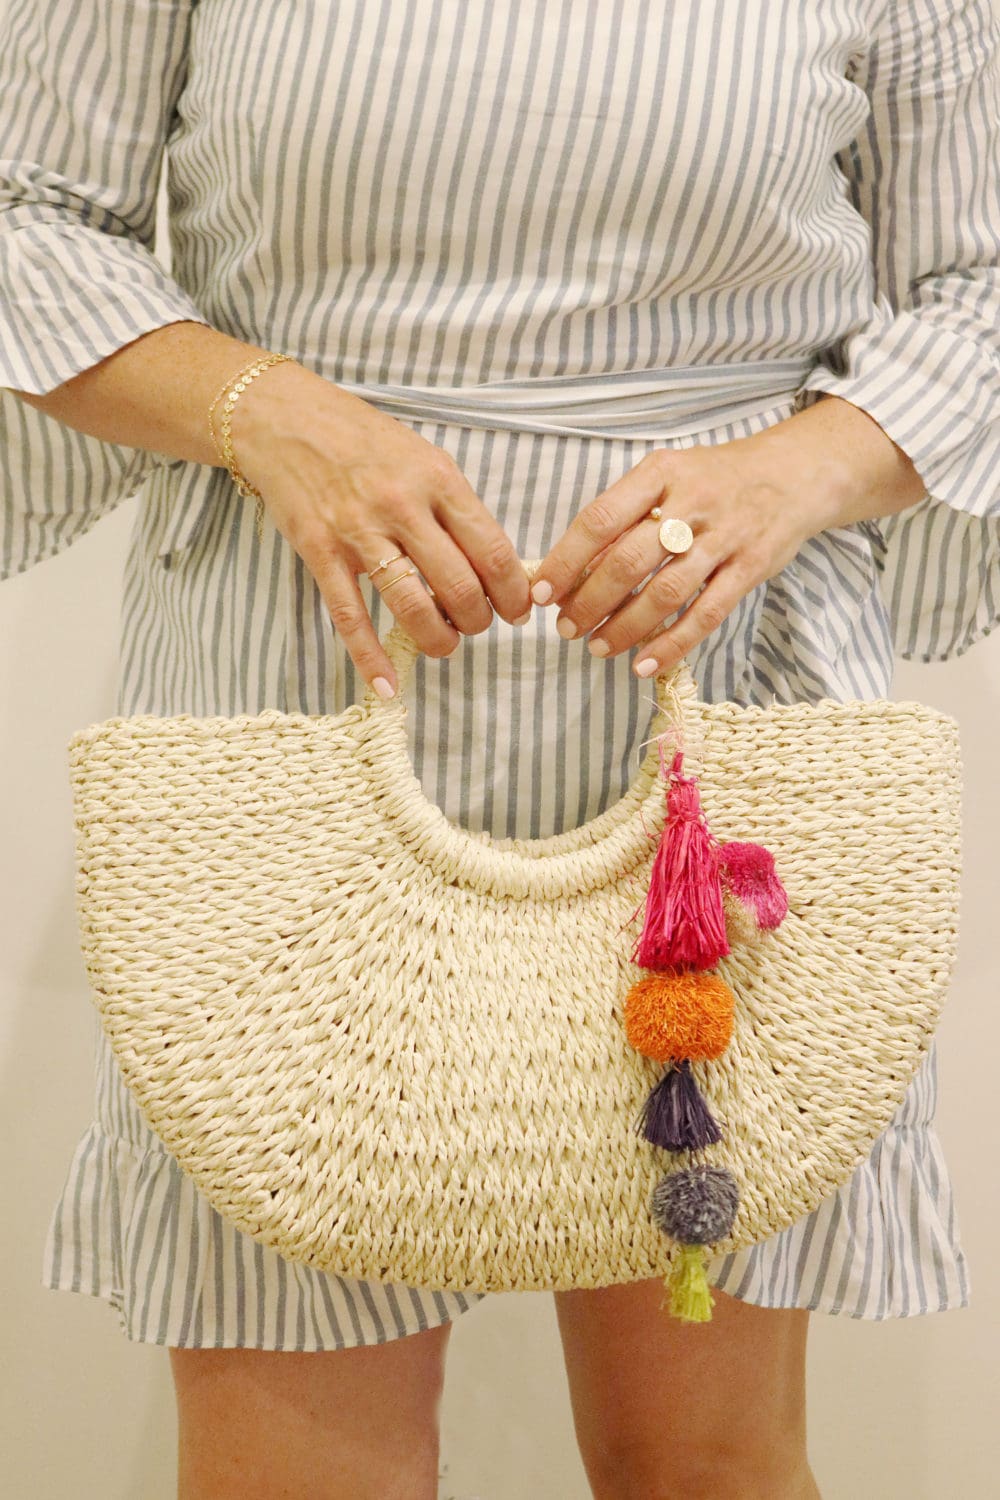 woven-straw-bag-with-tassels - Darling Darleen | A Lifestyle Design Blog